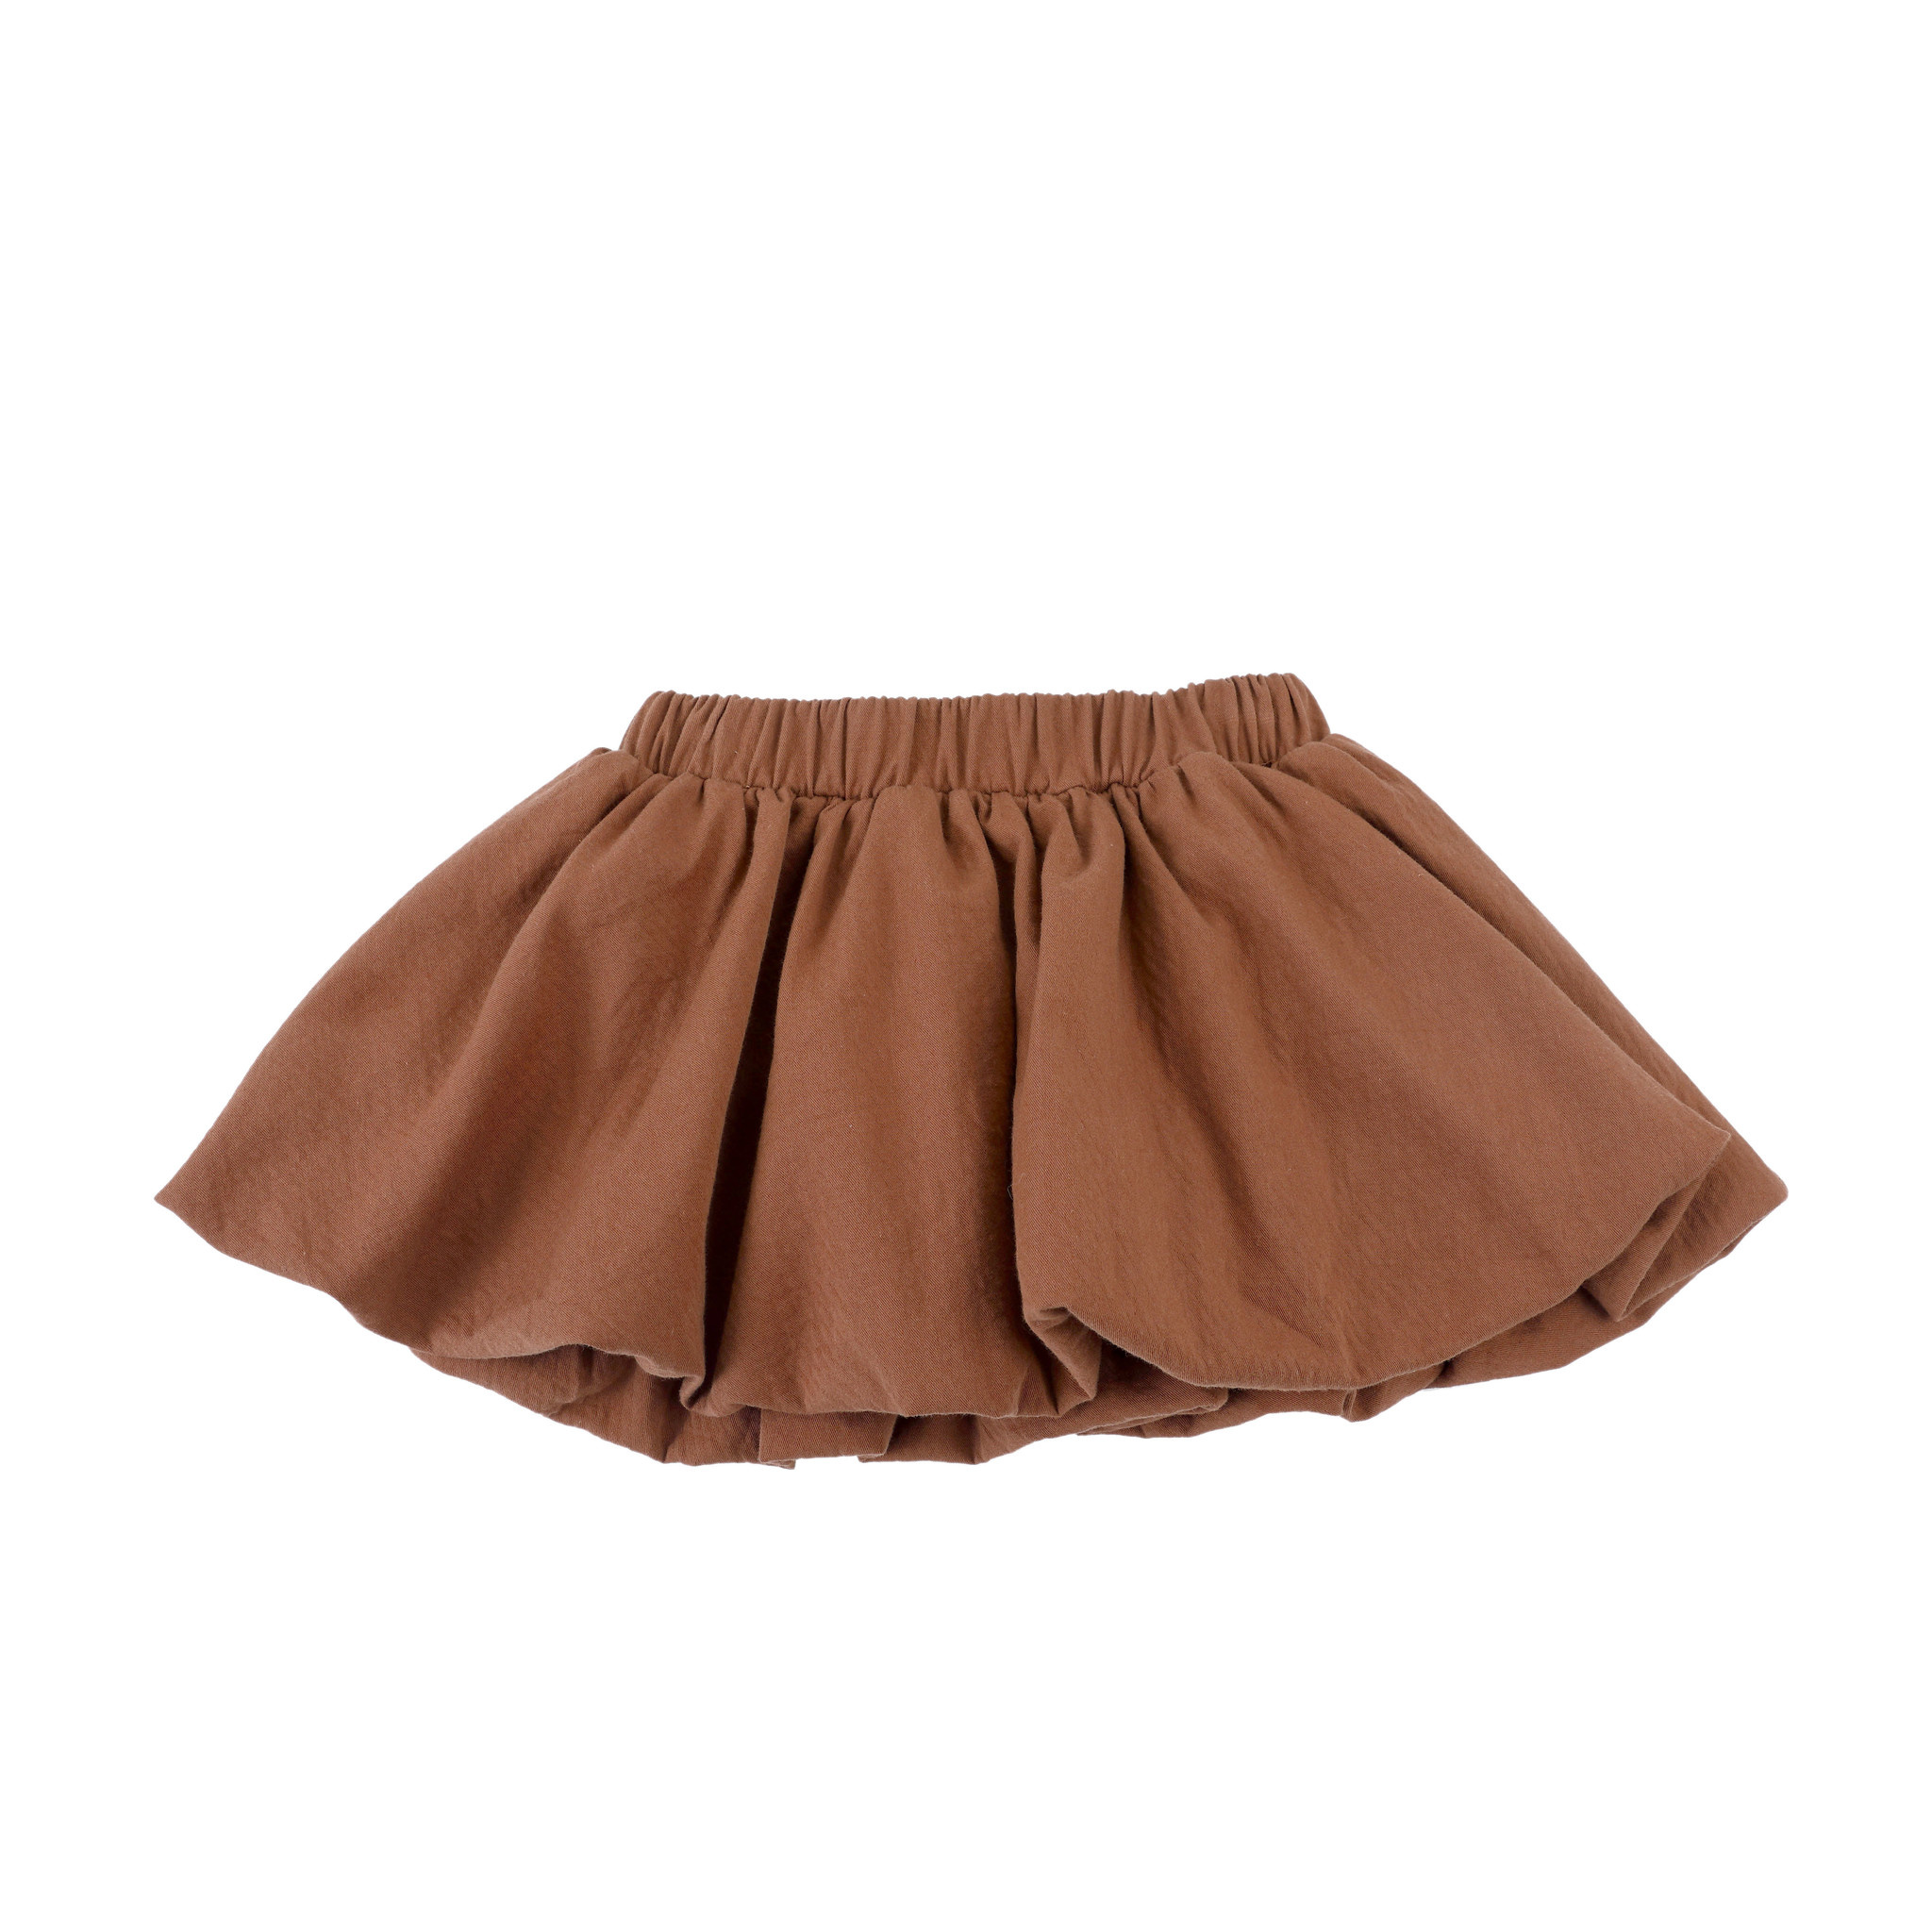 Justine Skirt - Rusty Coral-5